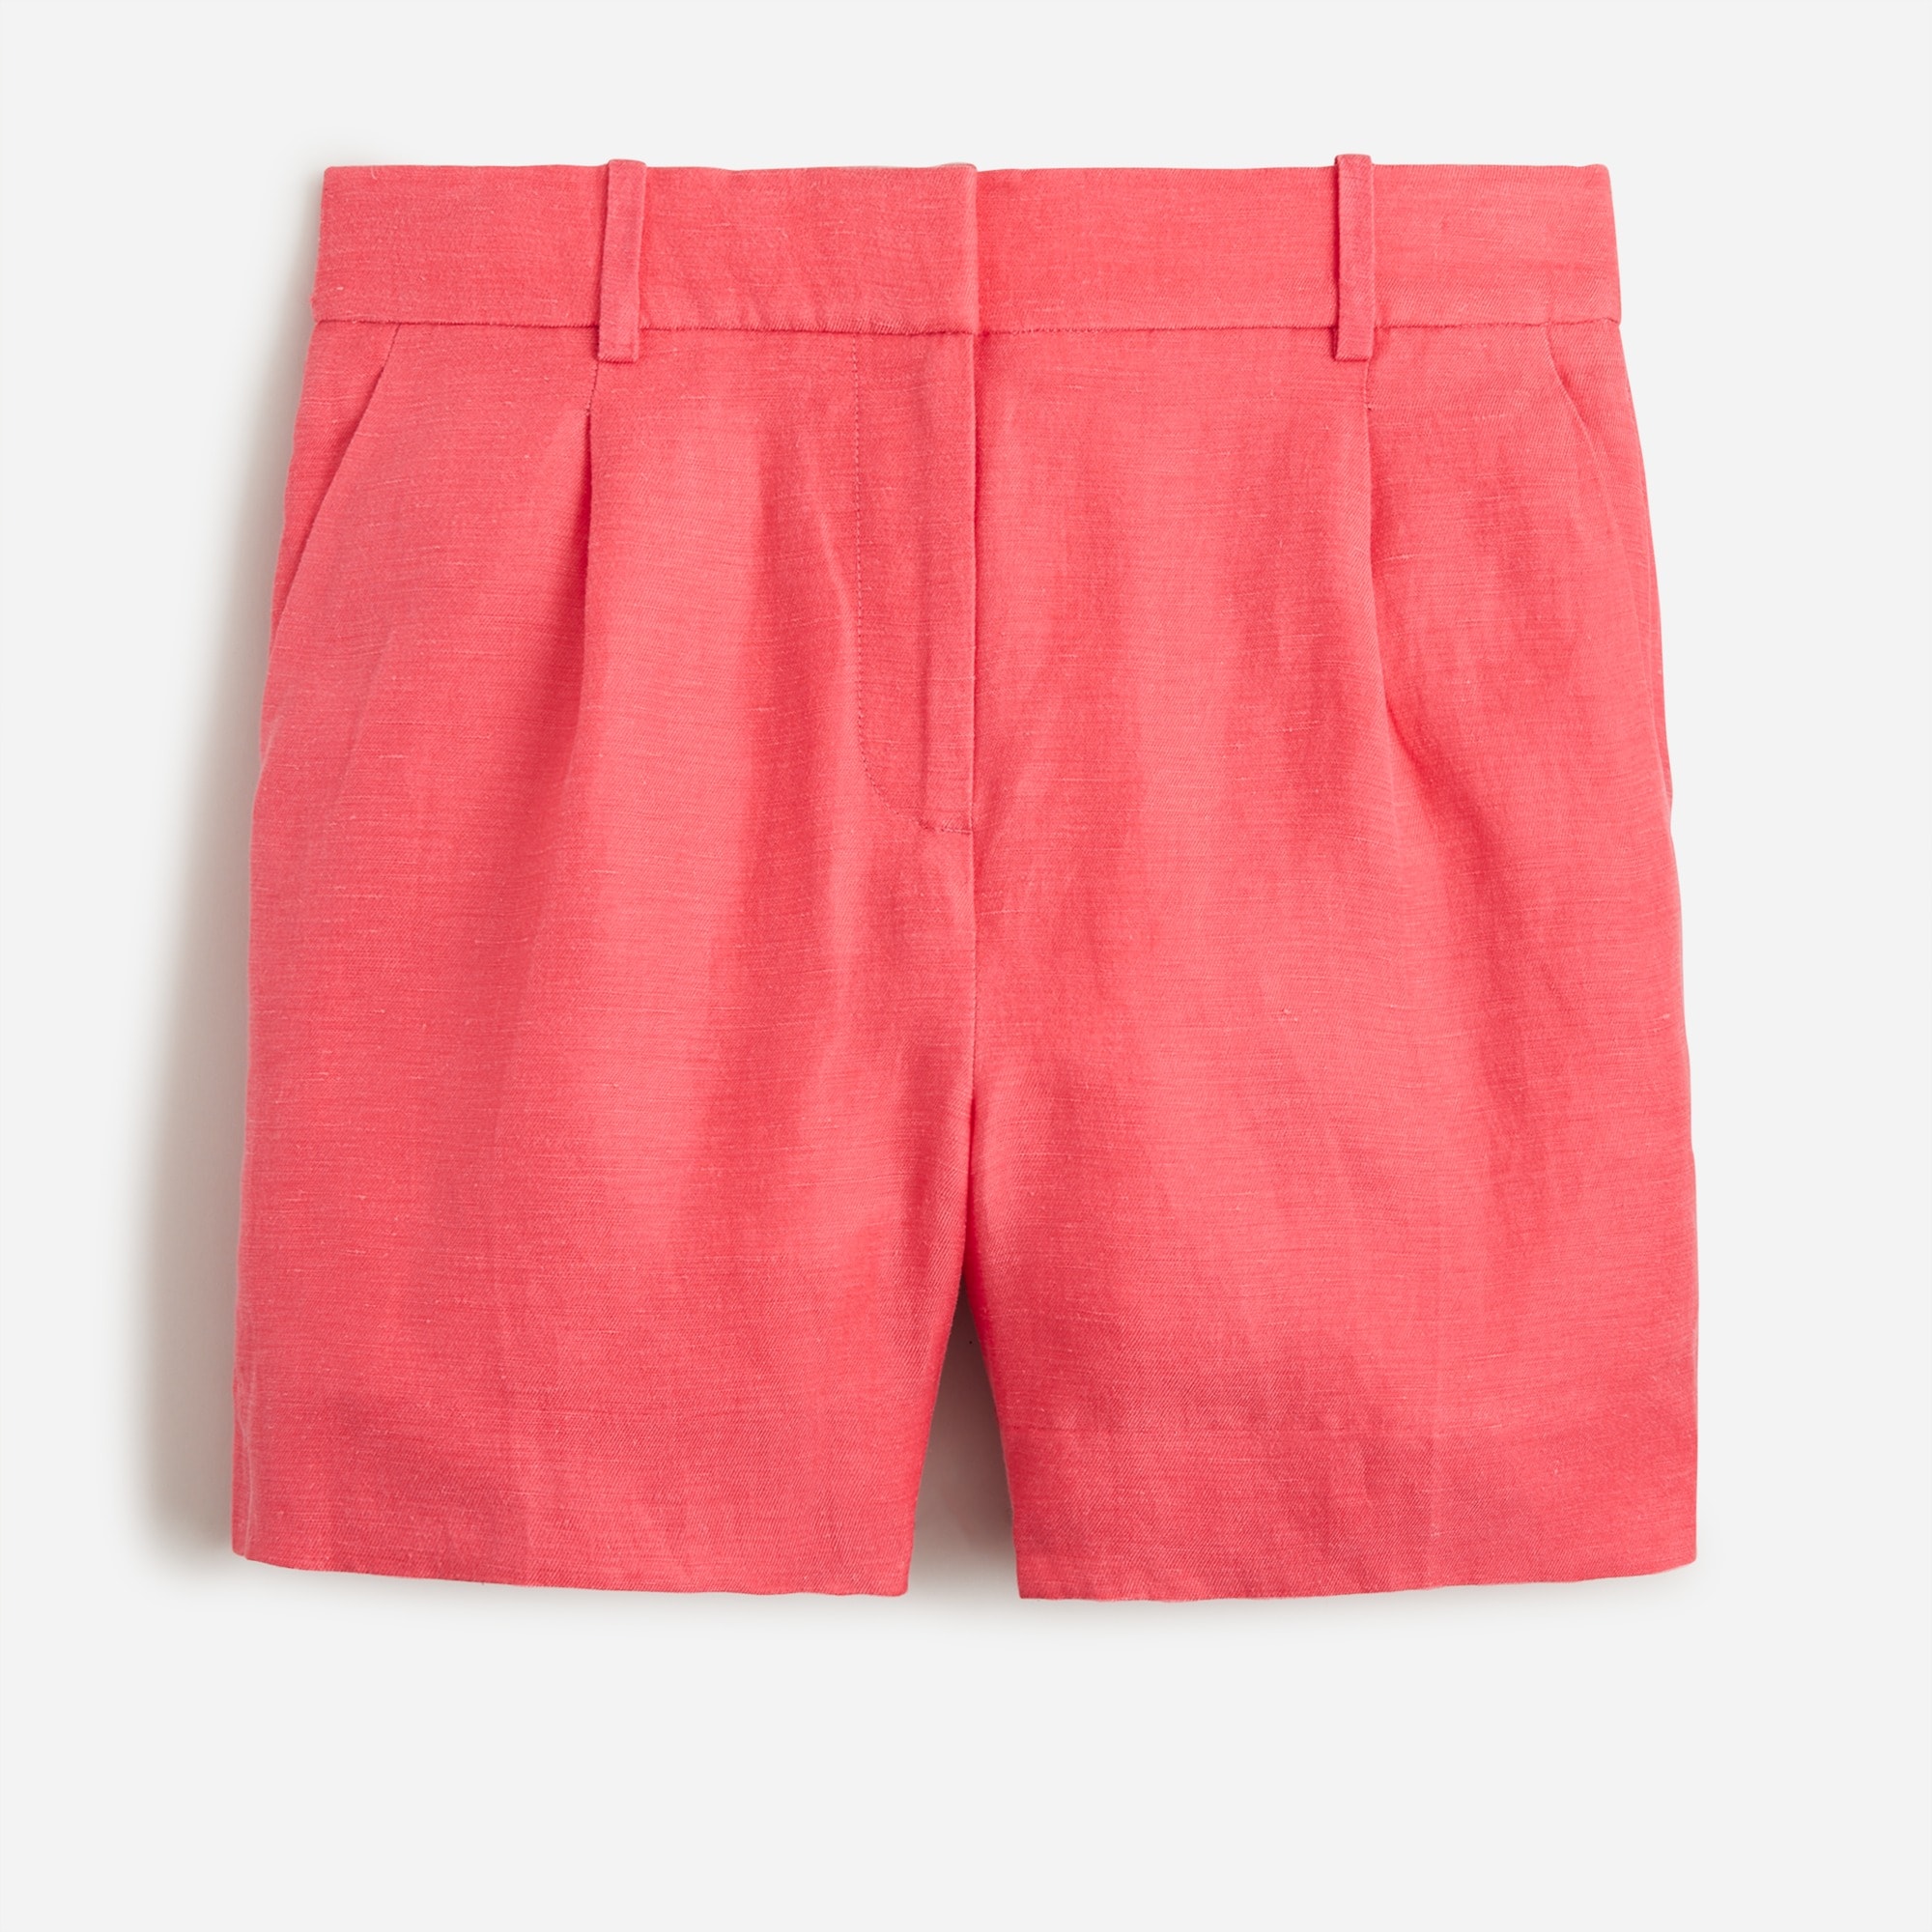 J.Crew: High-rise Pleated Suit Short In Chelsea Linen-cupro Blend For Women